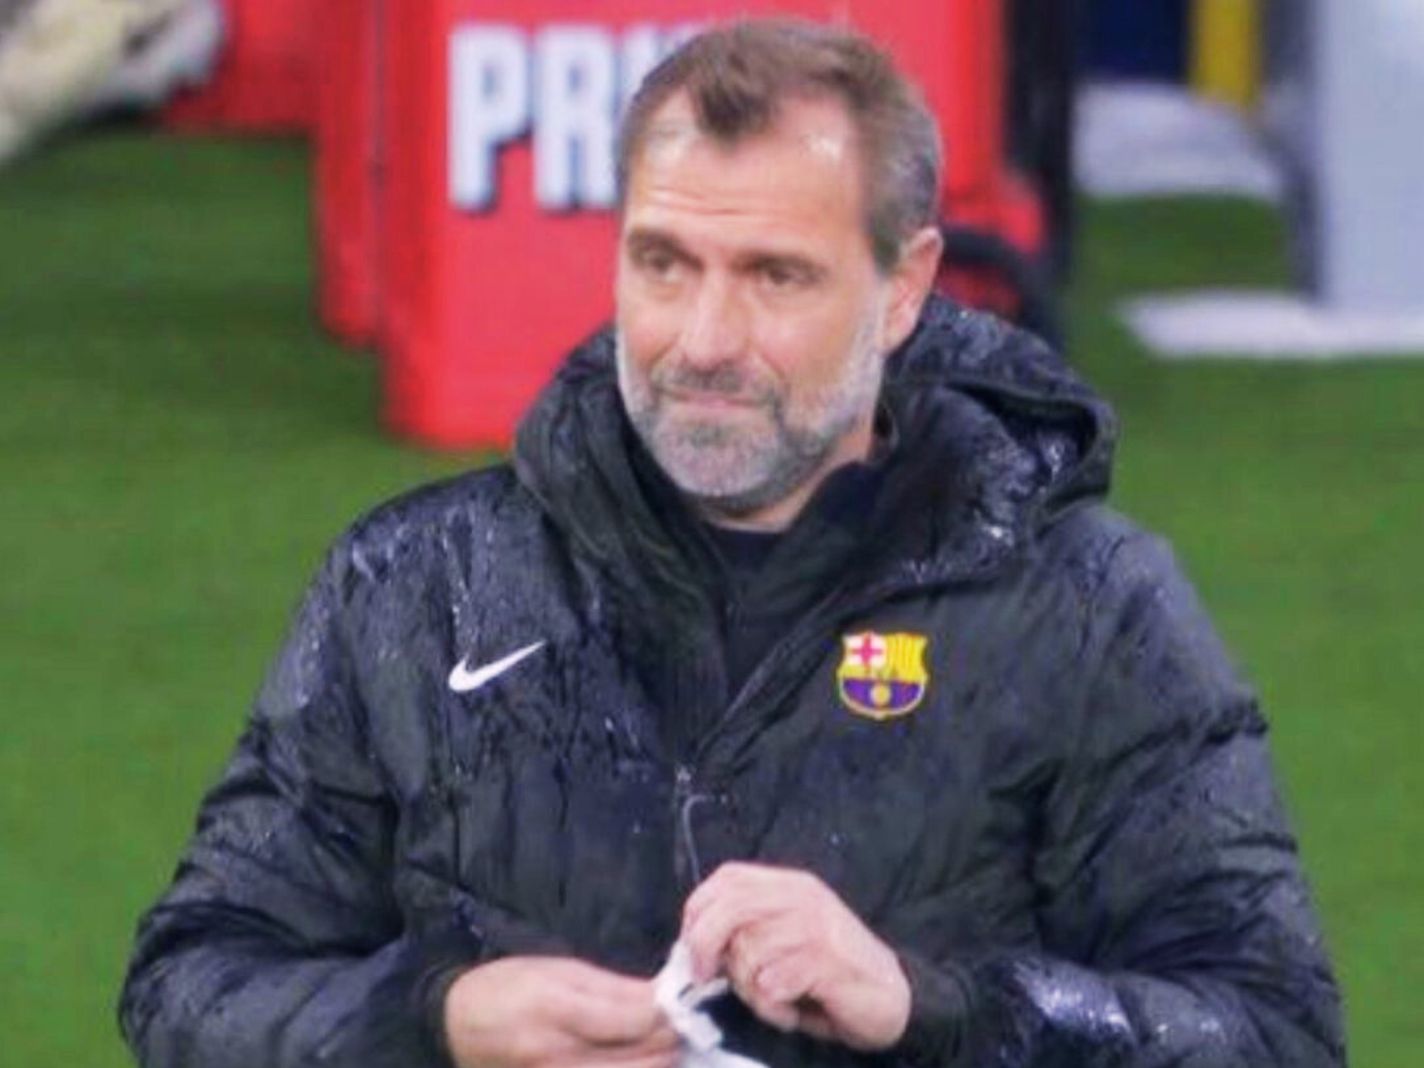 Does Barcelona Have a Jurgen Klopp Lookalike on Their Staff? Here’s What We Know